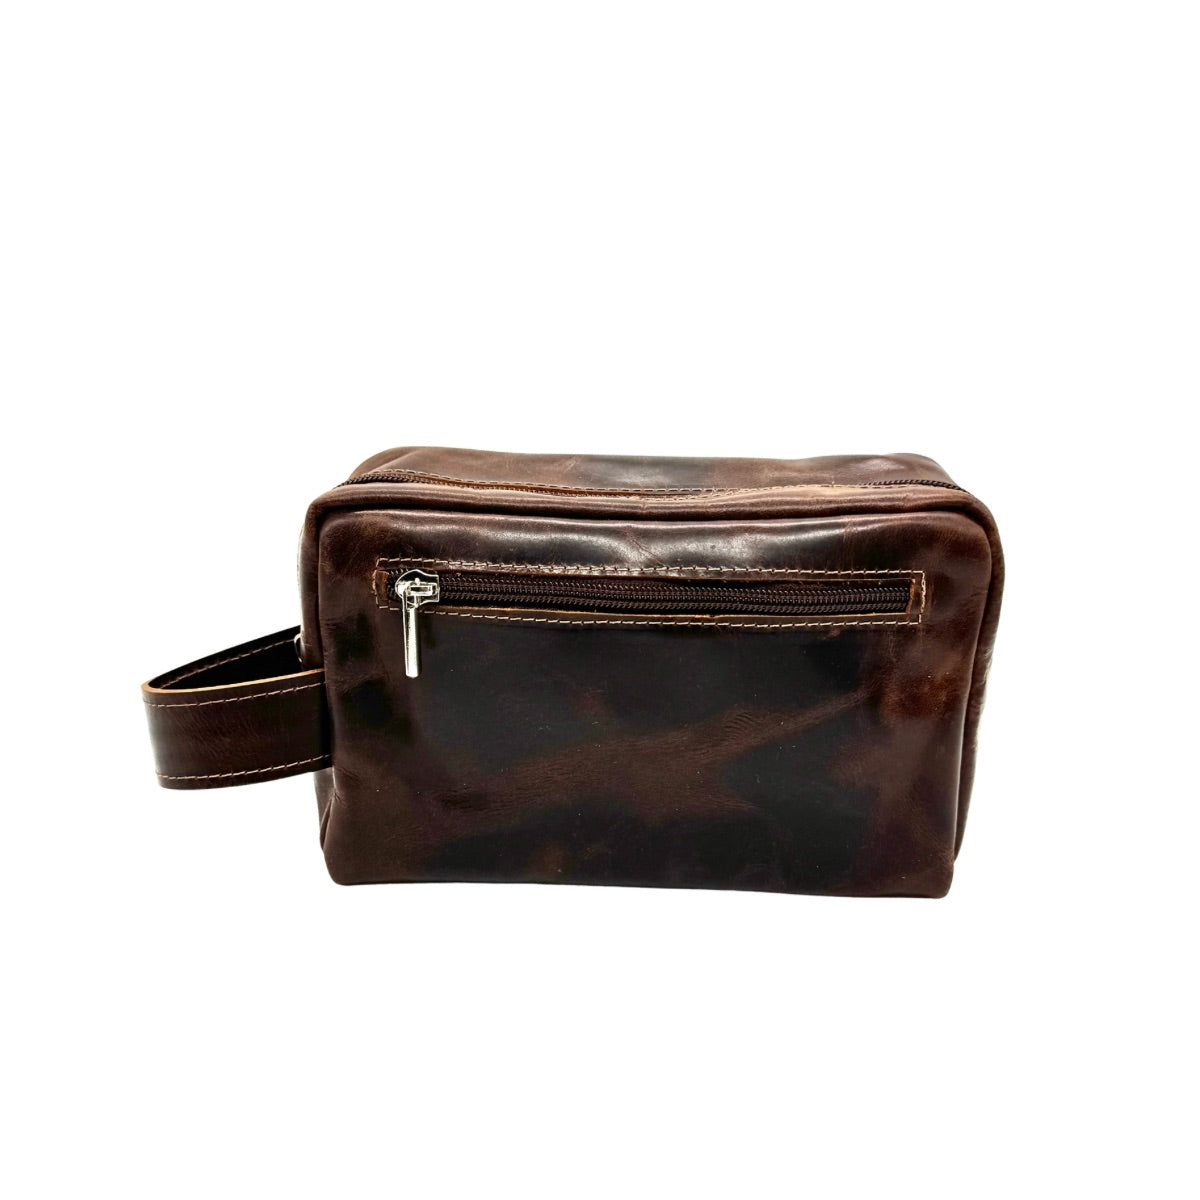 Leather Toiletry Bag - Oiled Brown